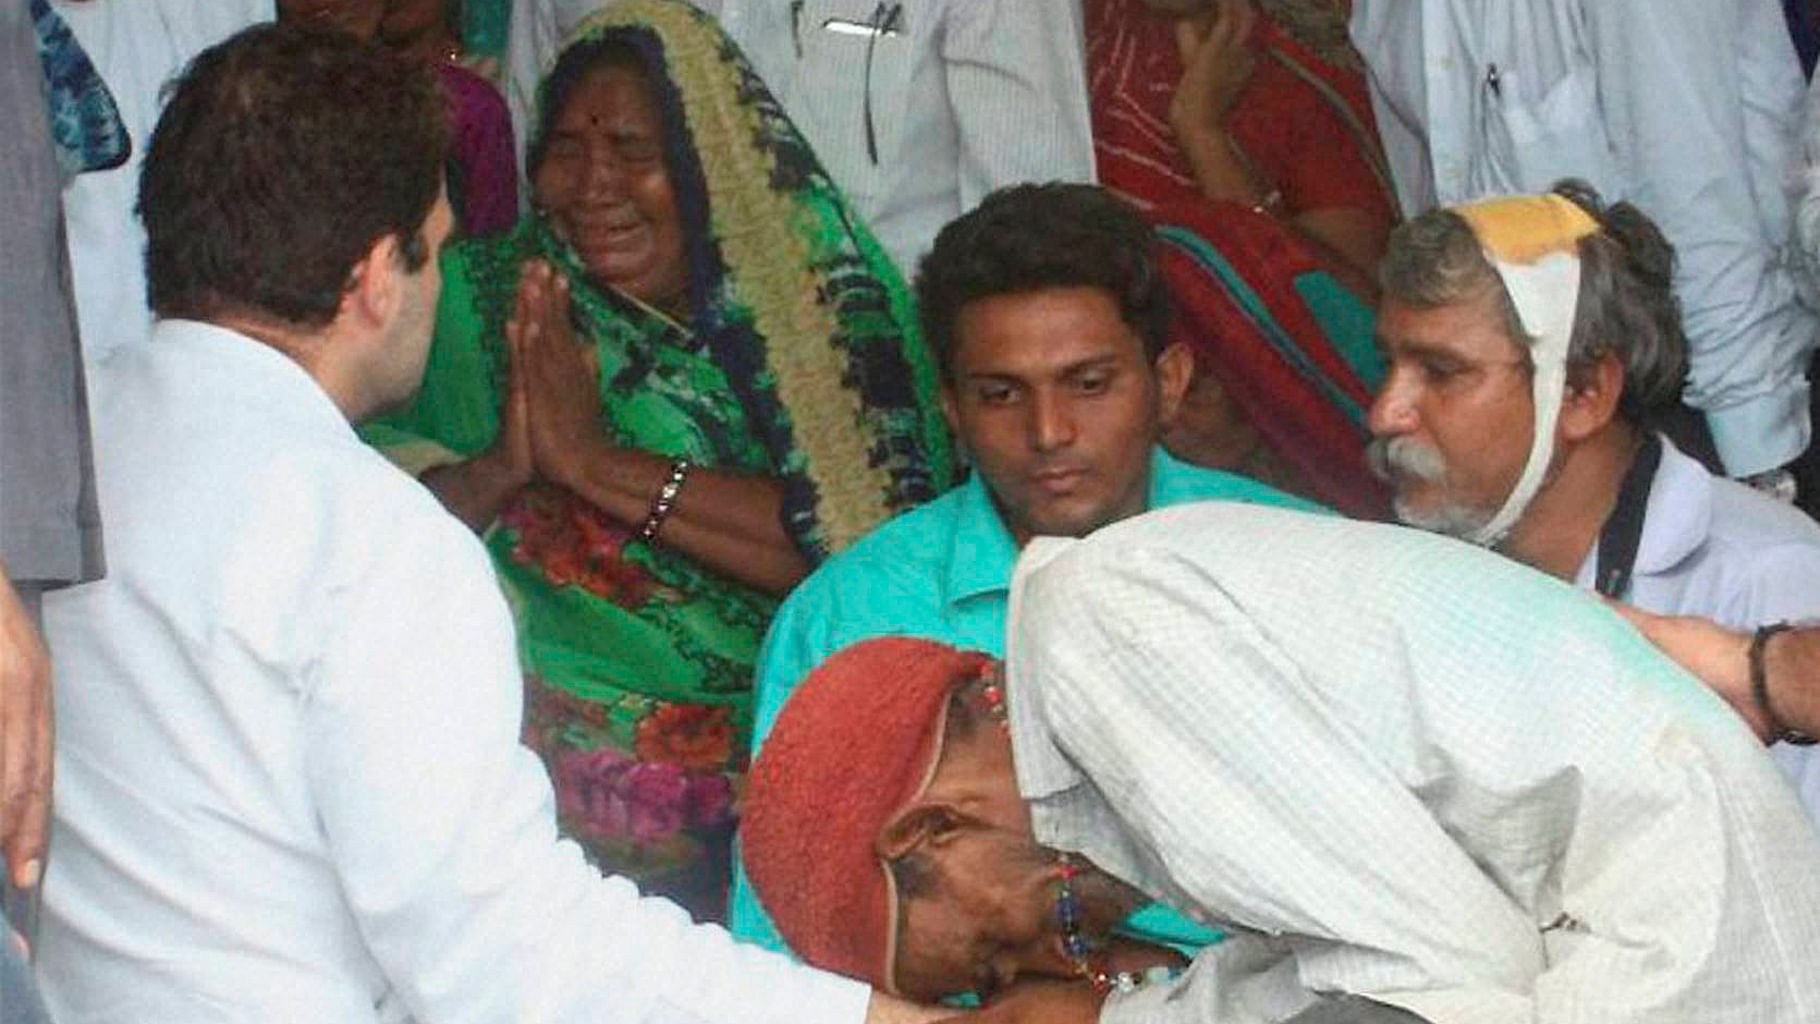 Rahul Gandhi visited the victims of the Una attack where four Dalit men were beaten up by ‘gau rakshaks’ for skinning a dead cow. (Photo: PTI)